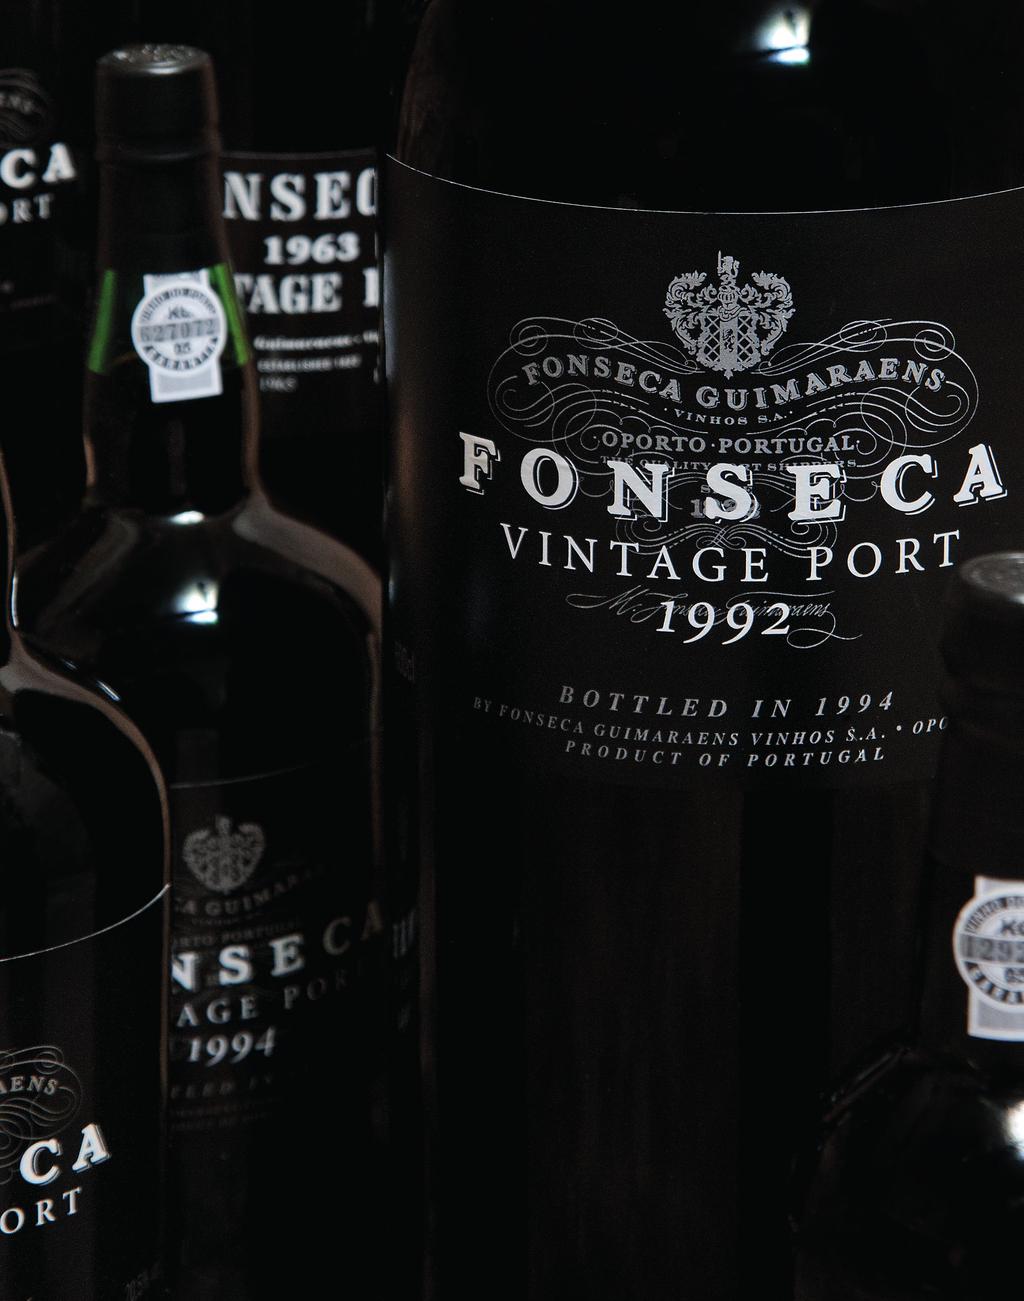 FINE AND RARE WINES FEATURING A VINTAGE PORT